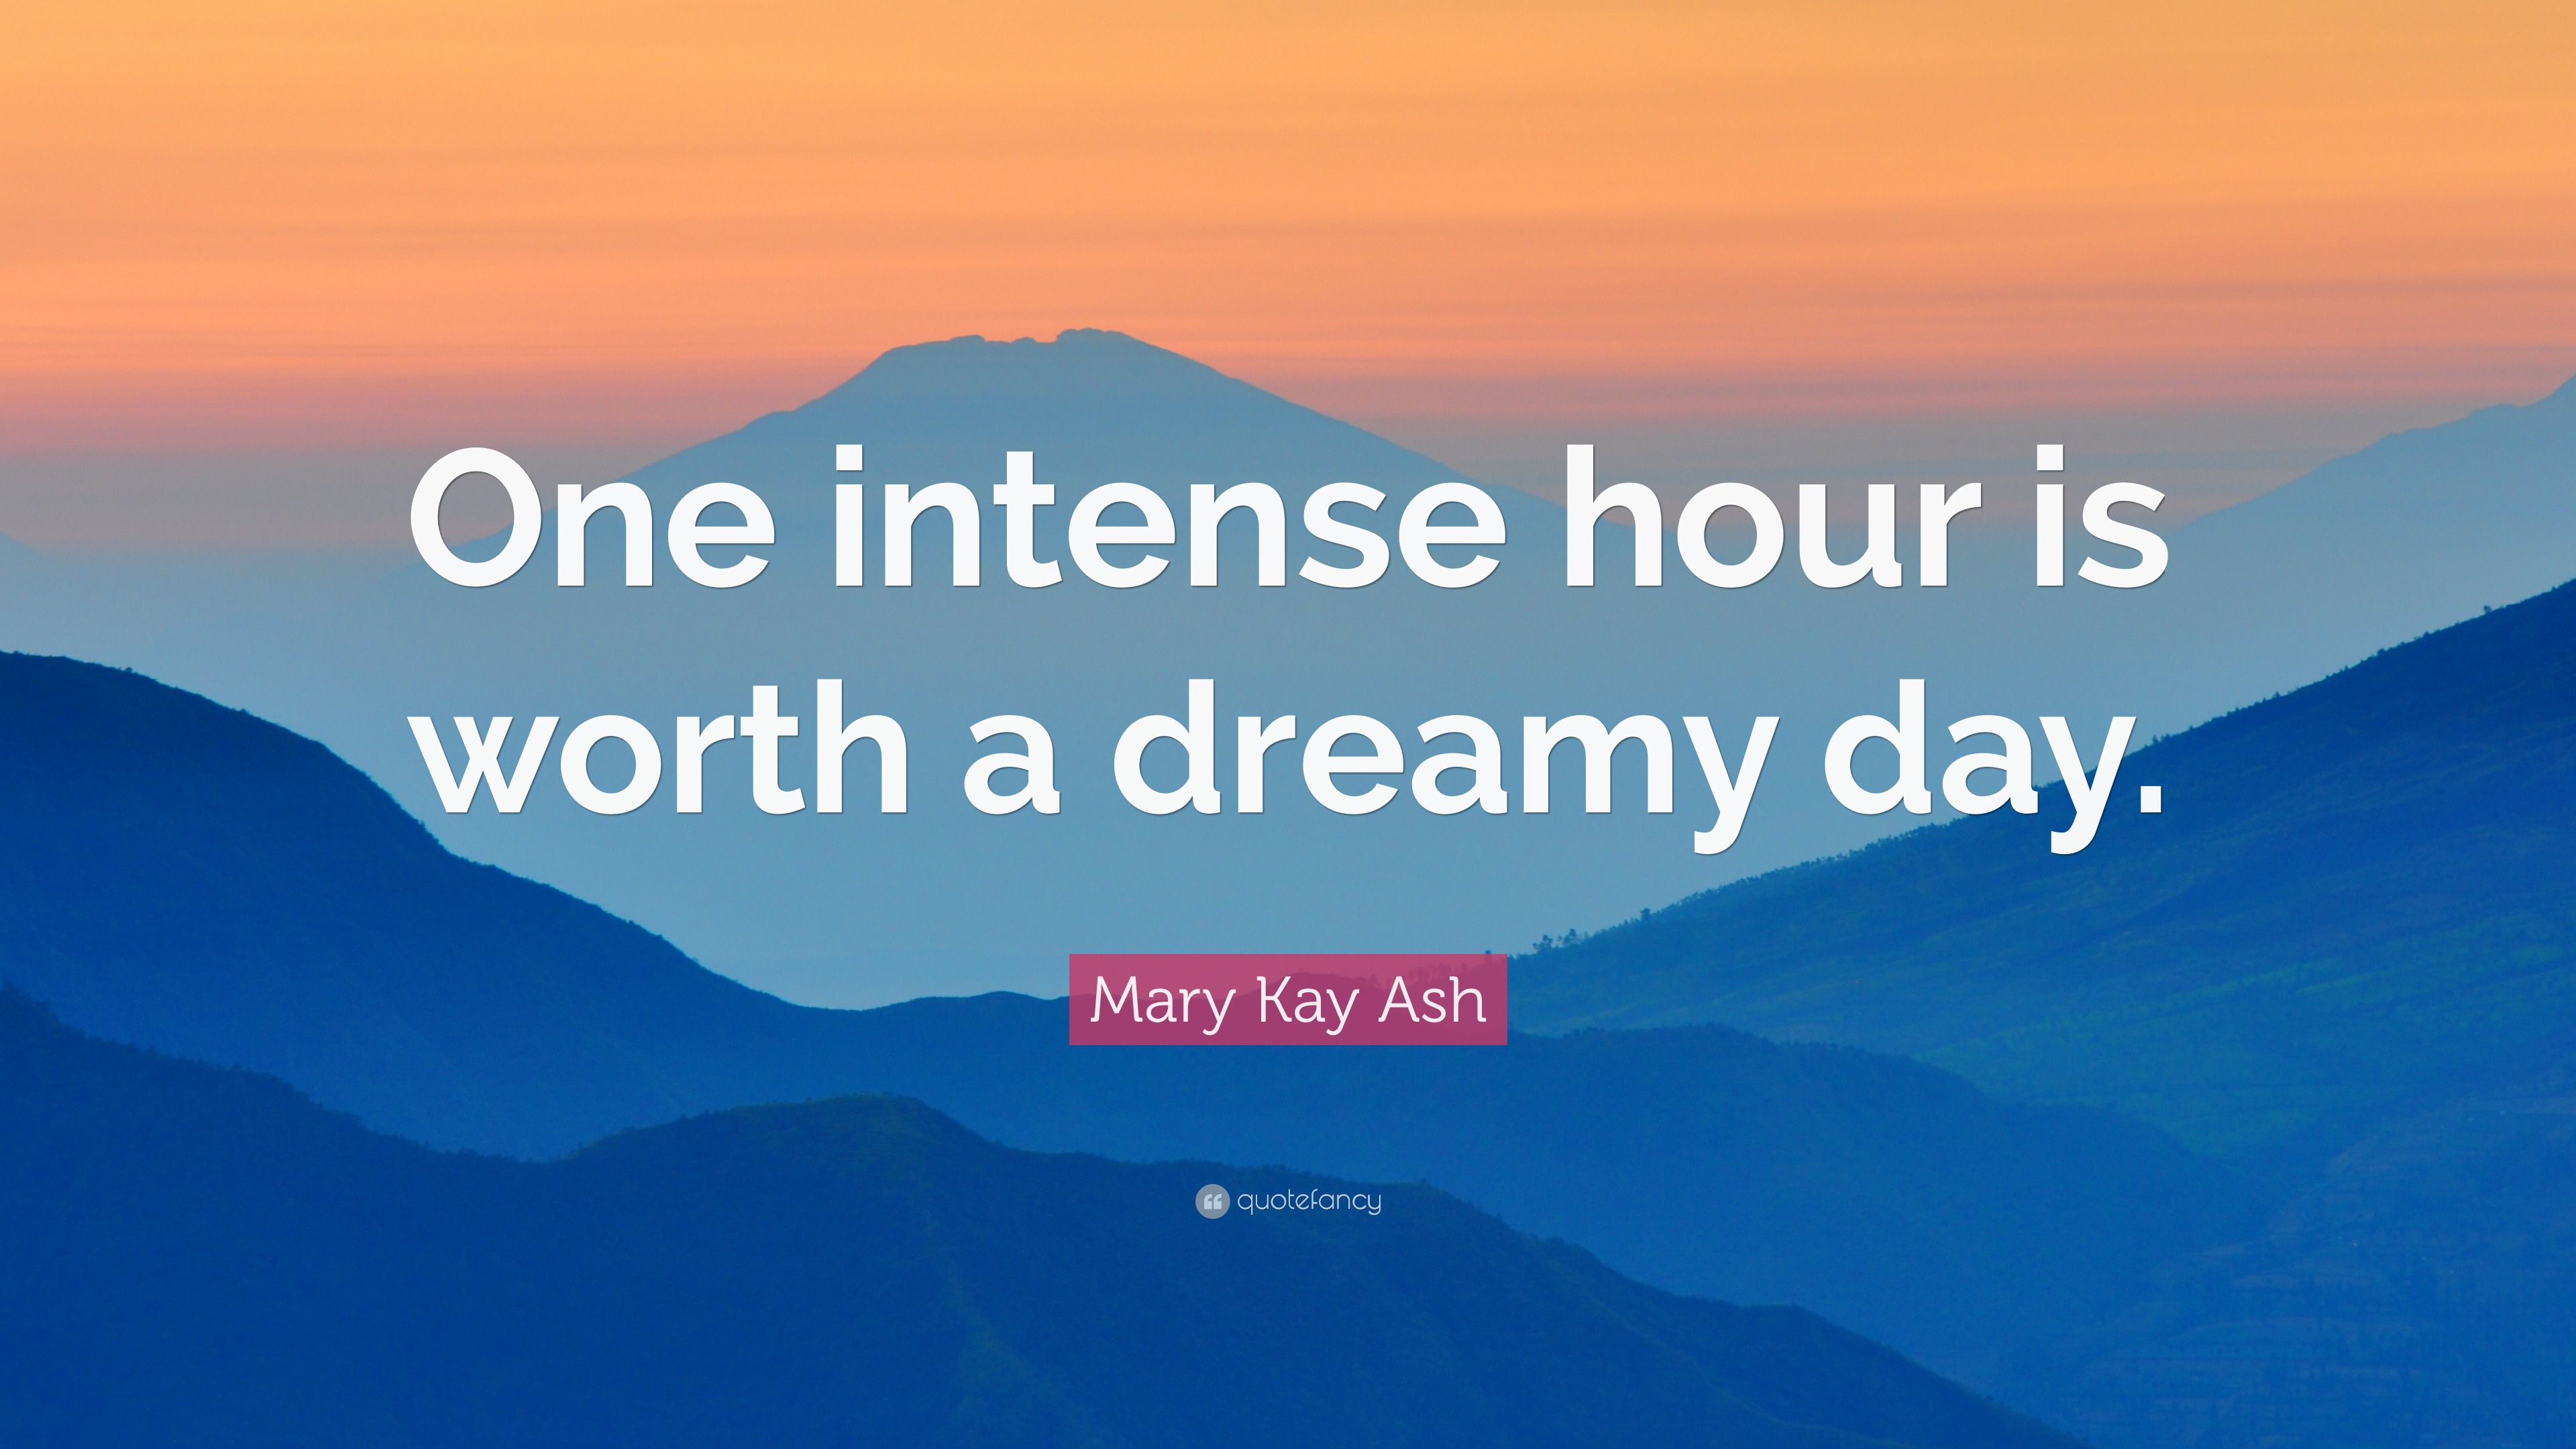 Mary Kay Ash Quotes (90 wallpapers) - Quotefancy